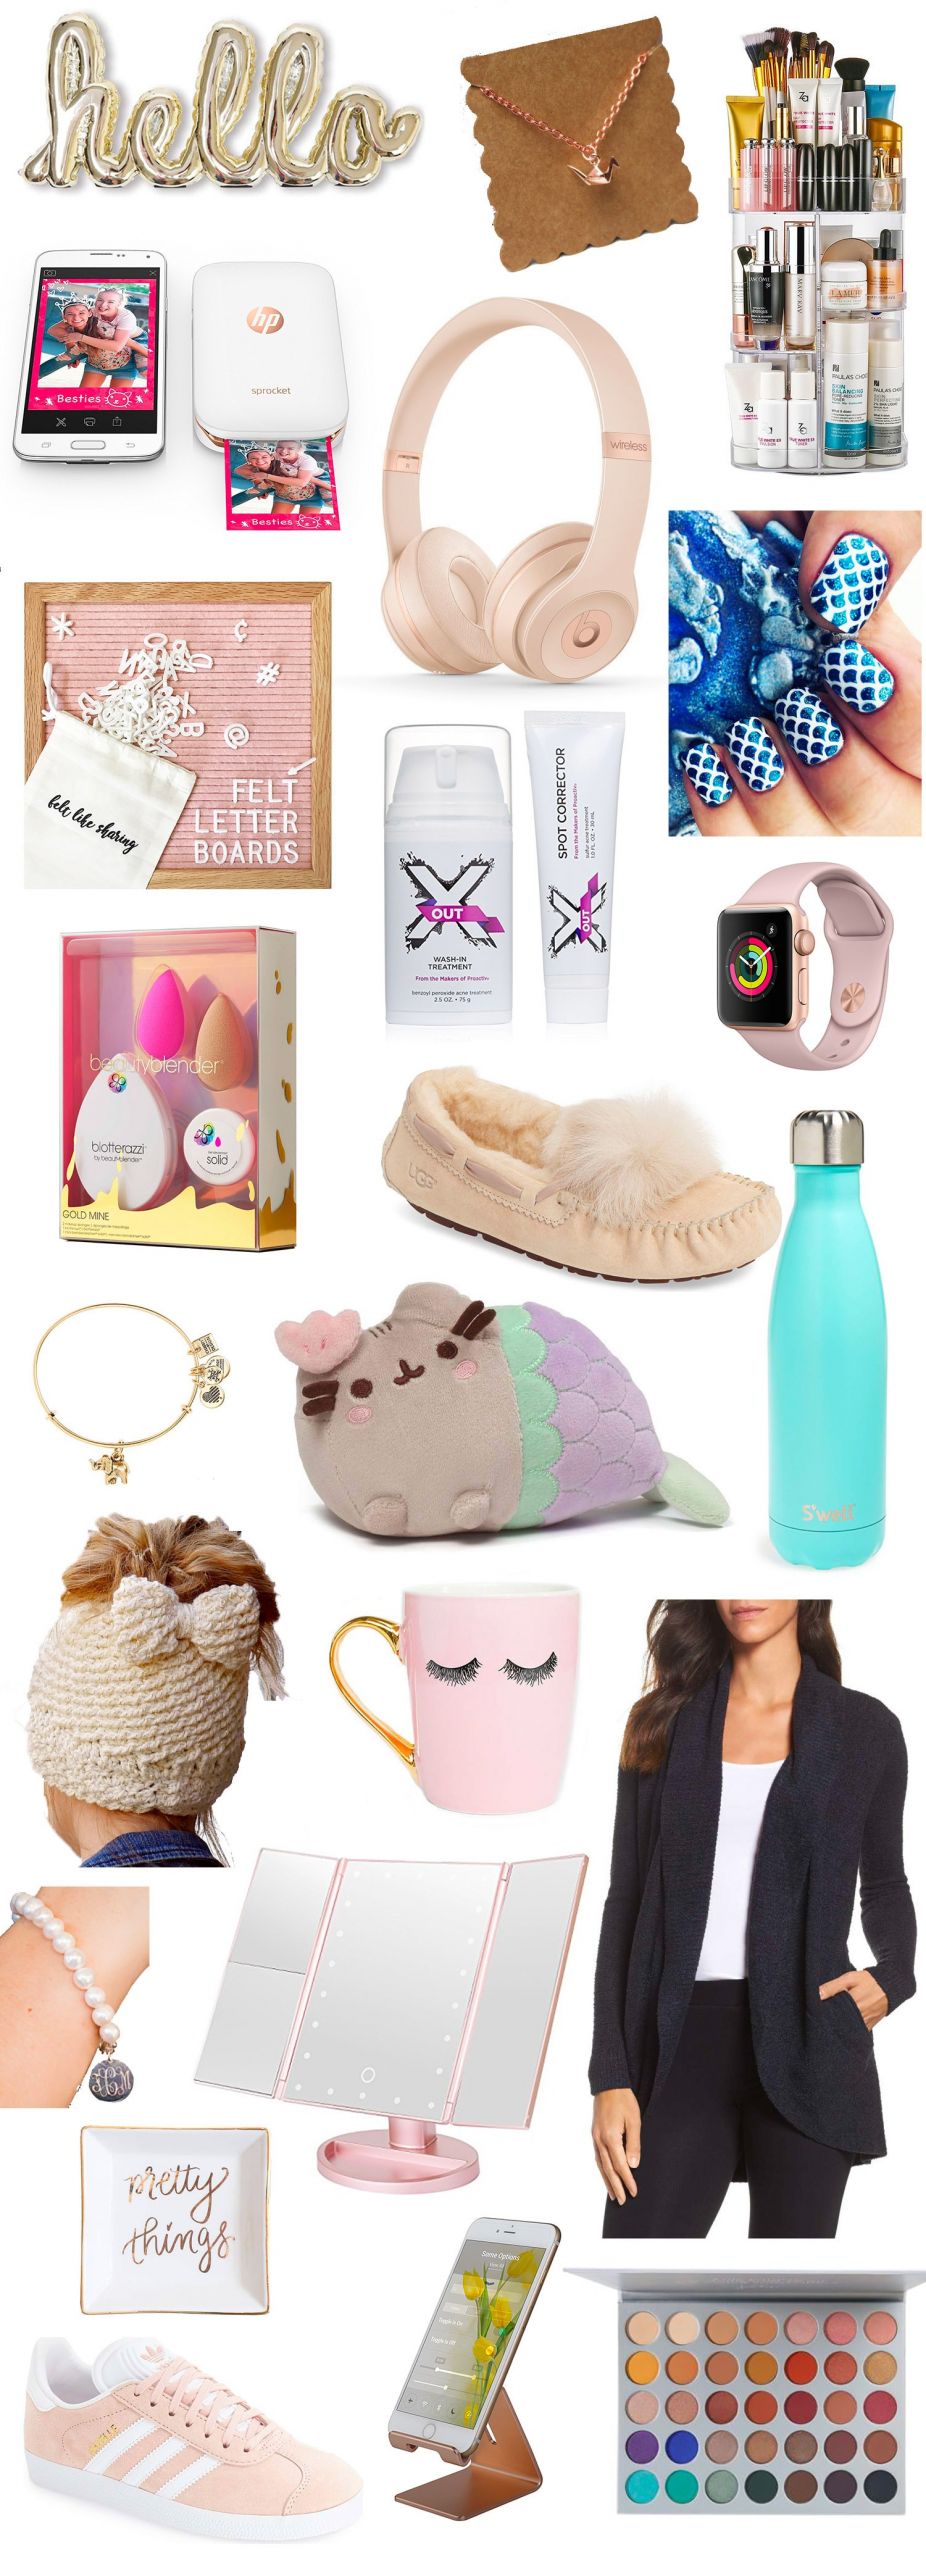 Top Gift Ideas For Girls
 Top Gifts for Teens This Christmas